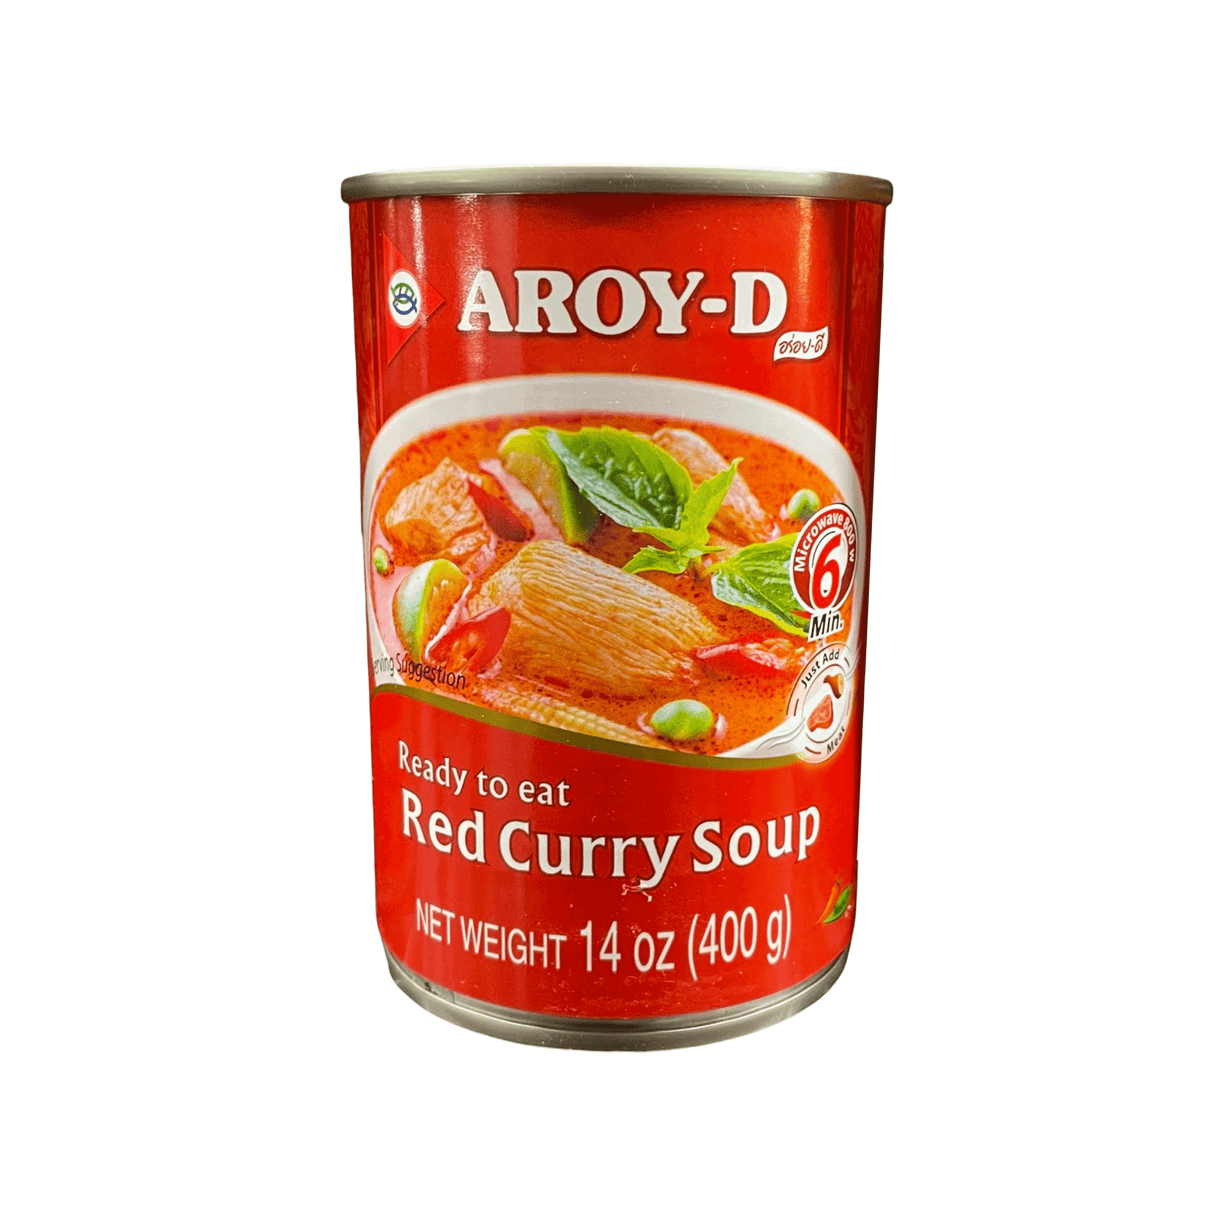 Aroy-d Red Curry Soup Ready to Eat